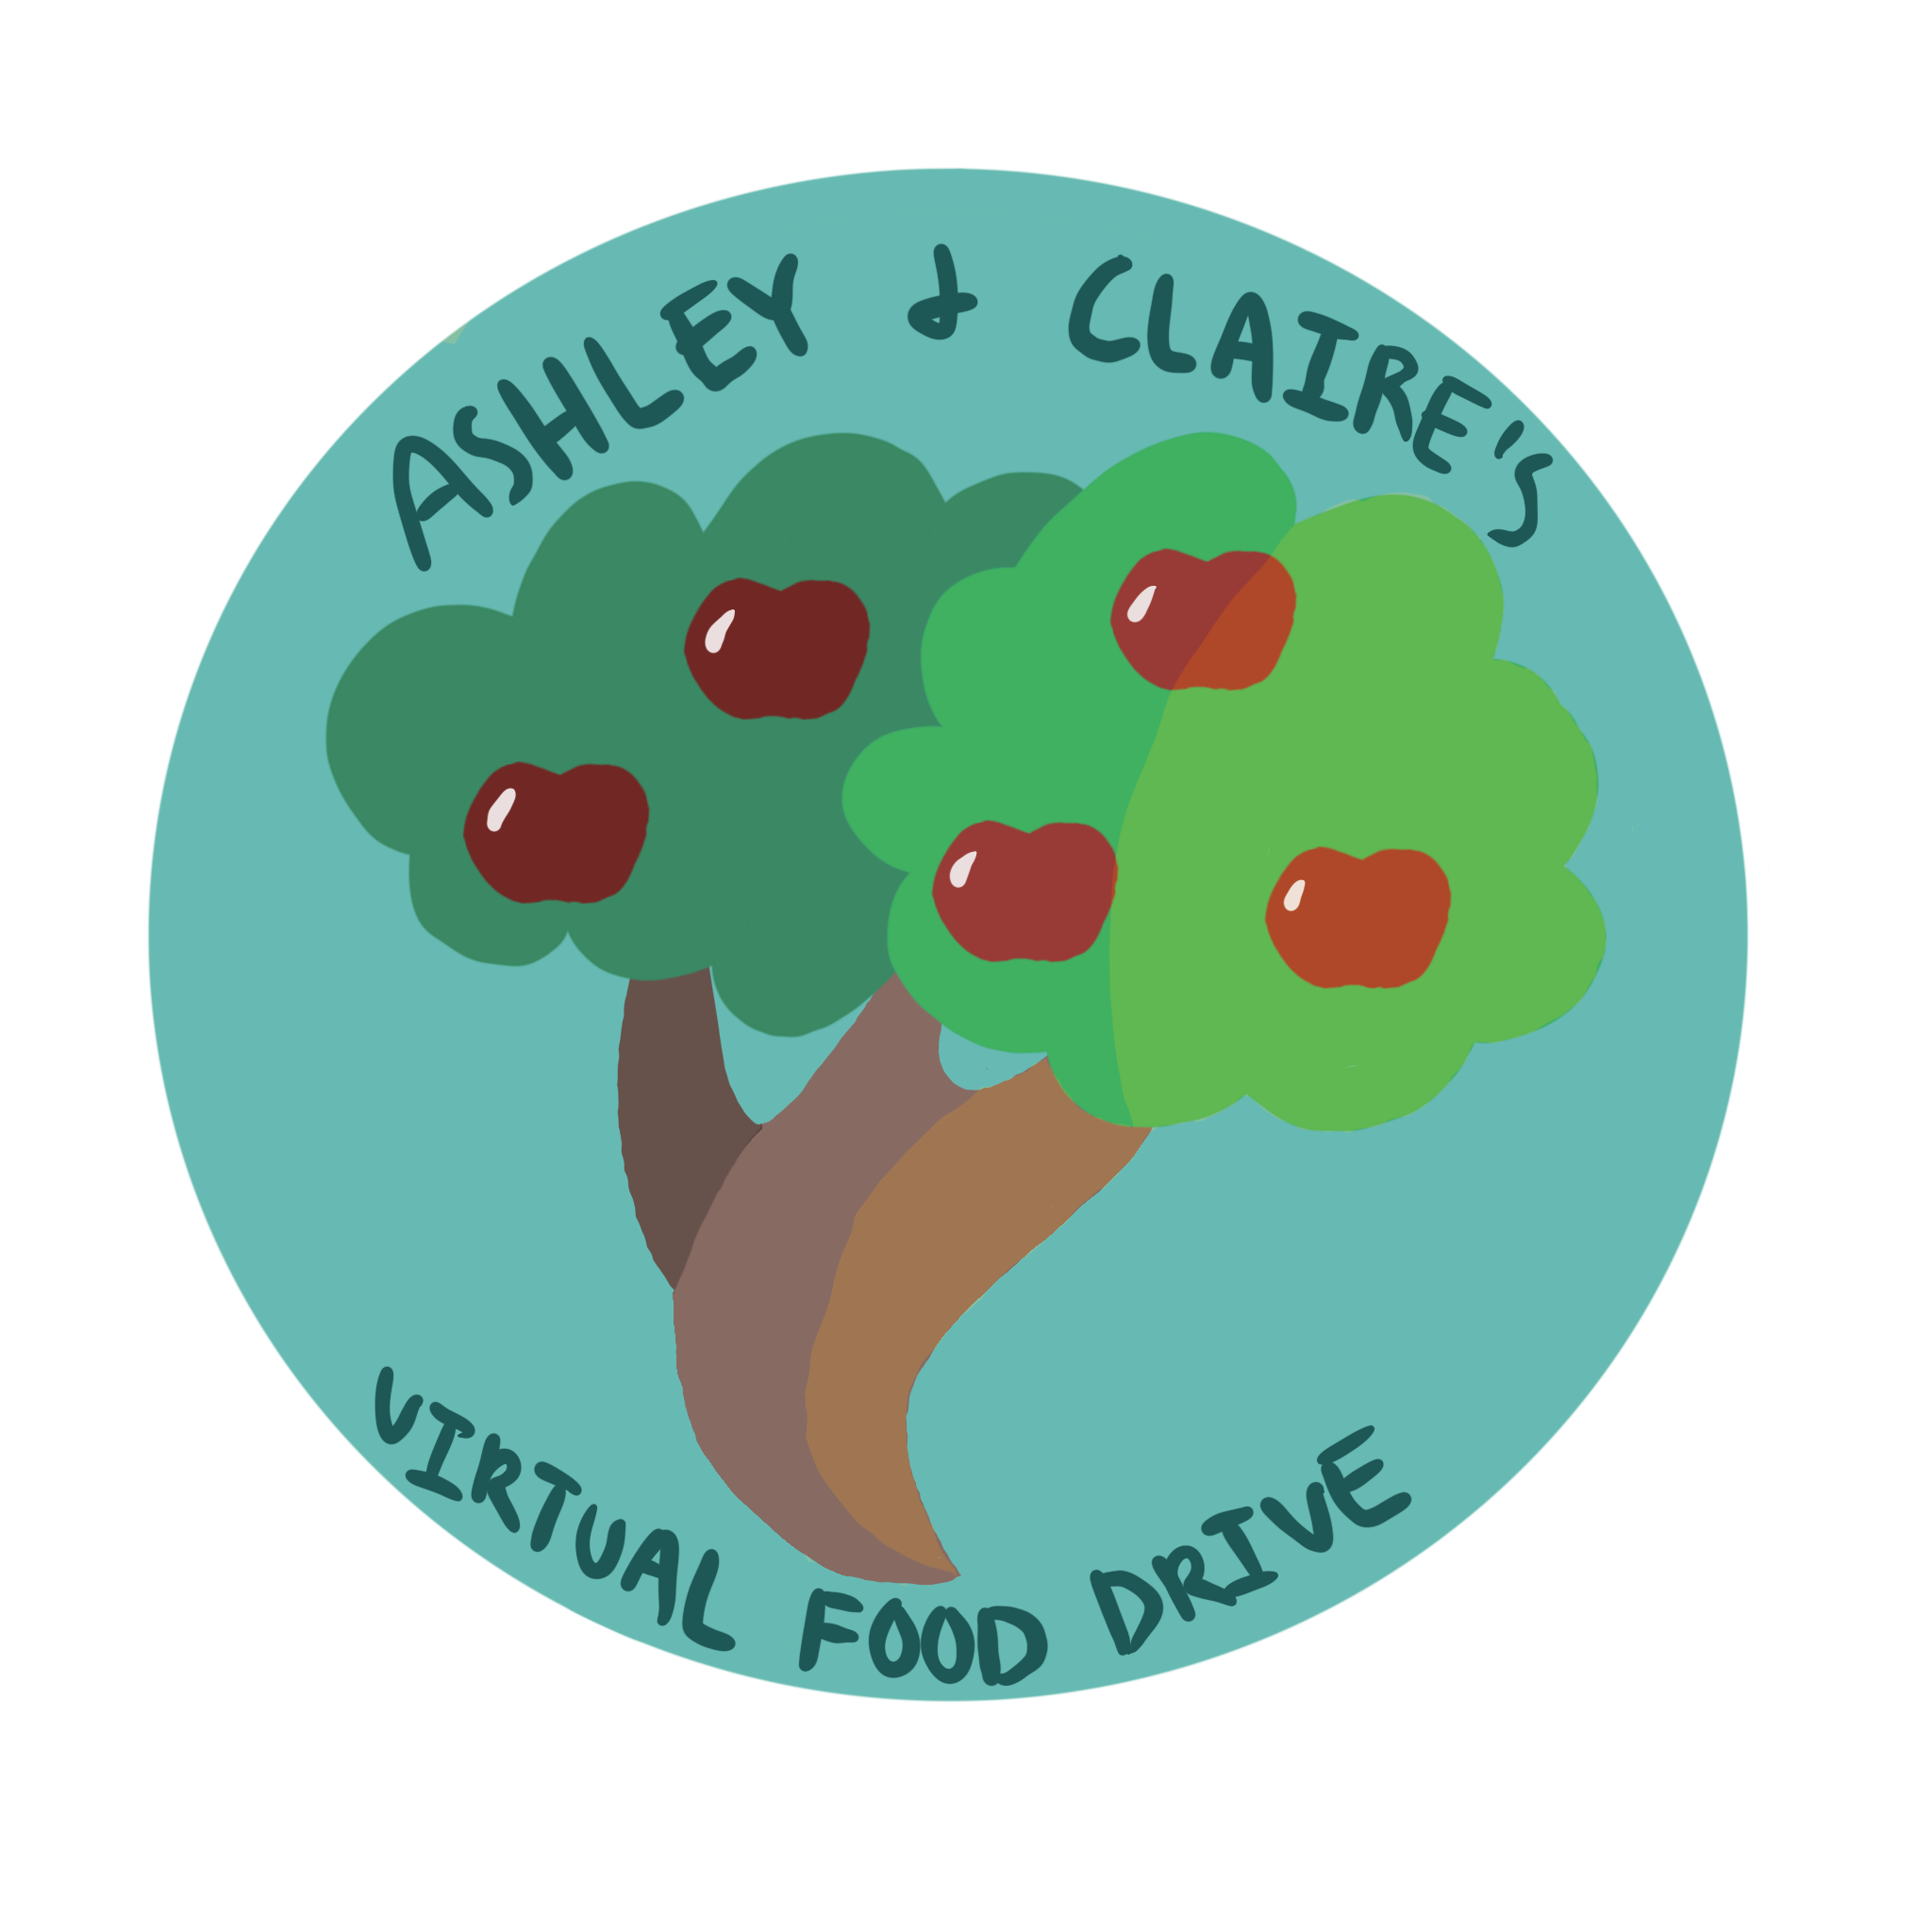 Ashley & Claire’s Virtual Food Drive